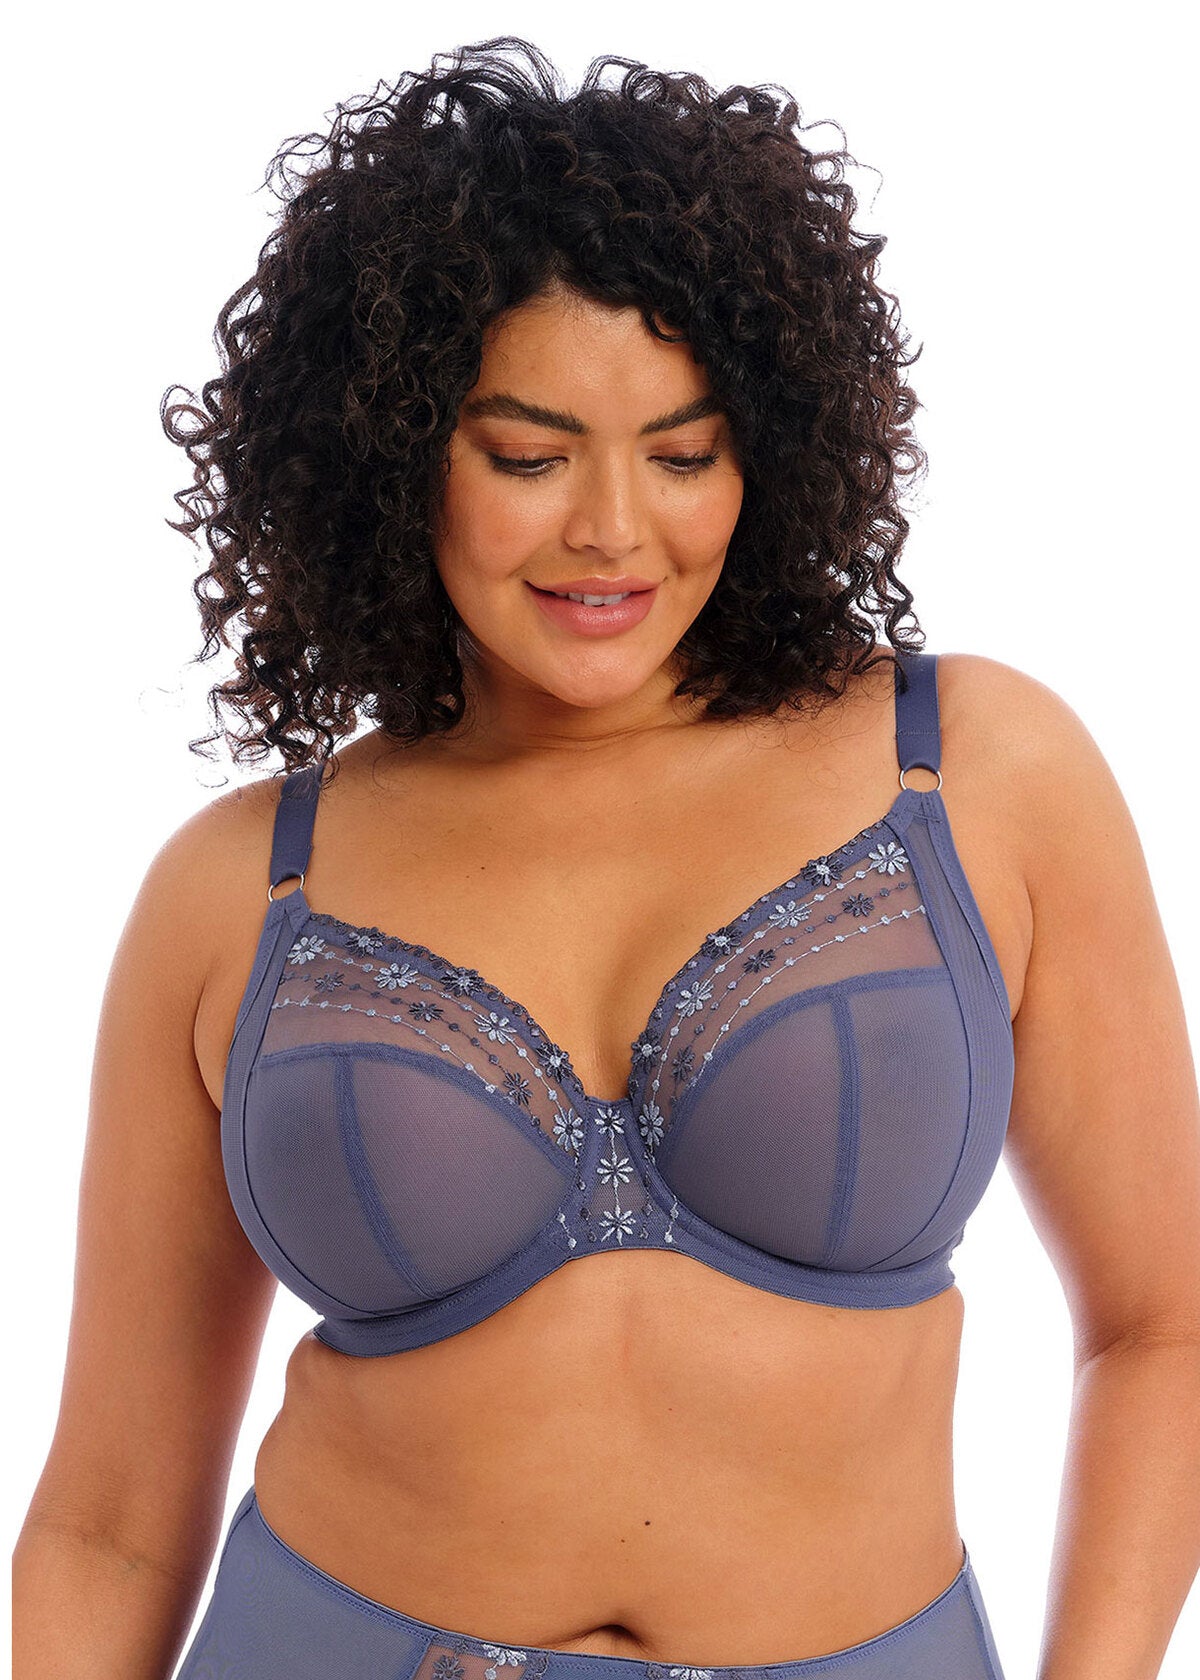 I'm a 34DDD - I did a huge Aerie bra haul & my girls were defying gravity  in the lacy number